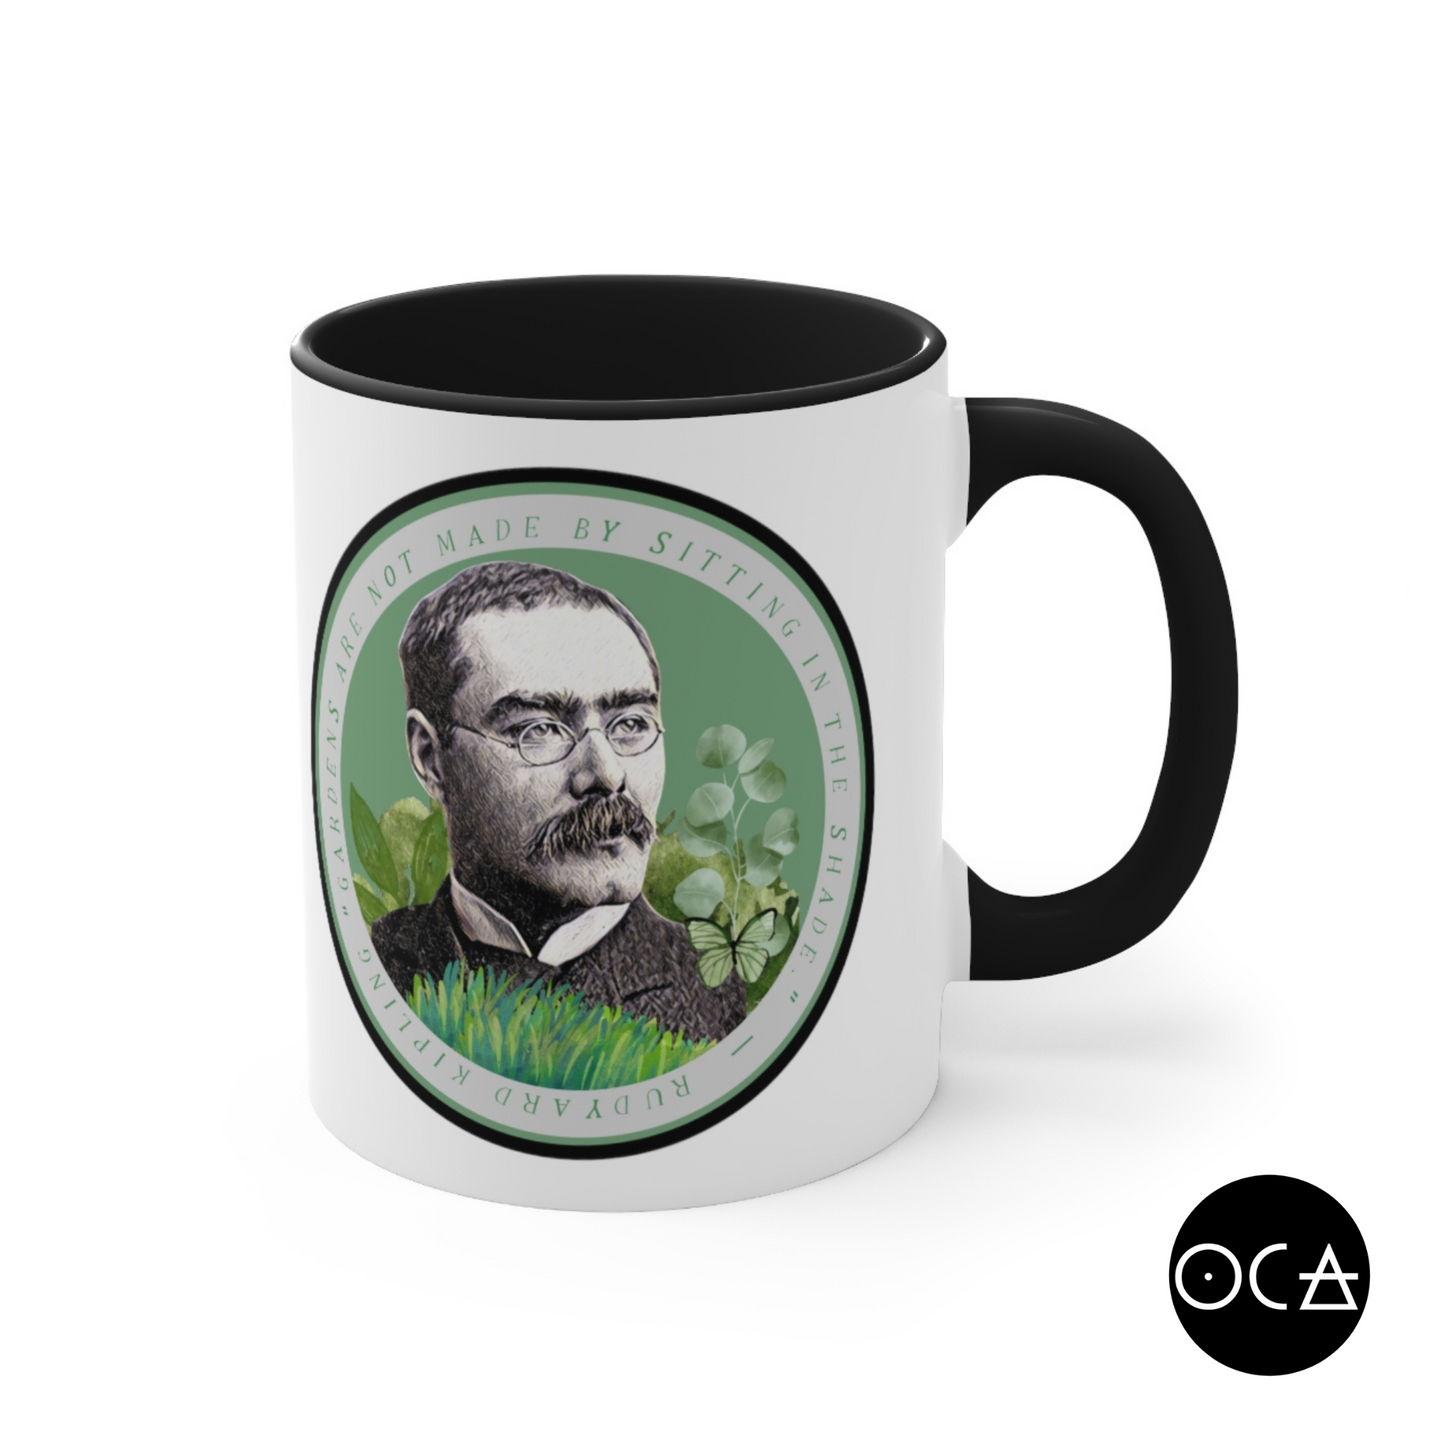 Rudyard Kipling Mug (Doublesided/2 Color Options) Herbteller Lucky Mugs | Gifts for Writers, Readers, Tellers, and Taleswappers